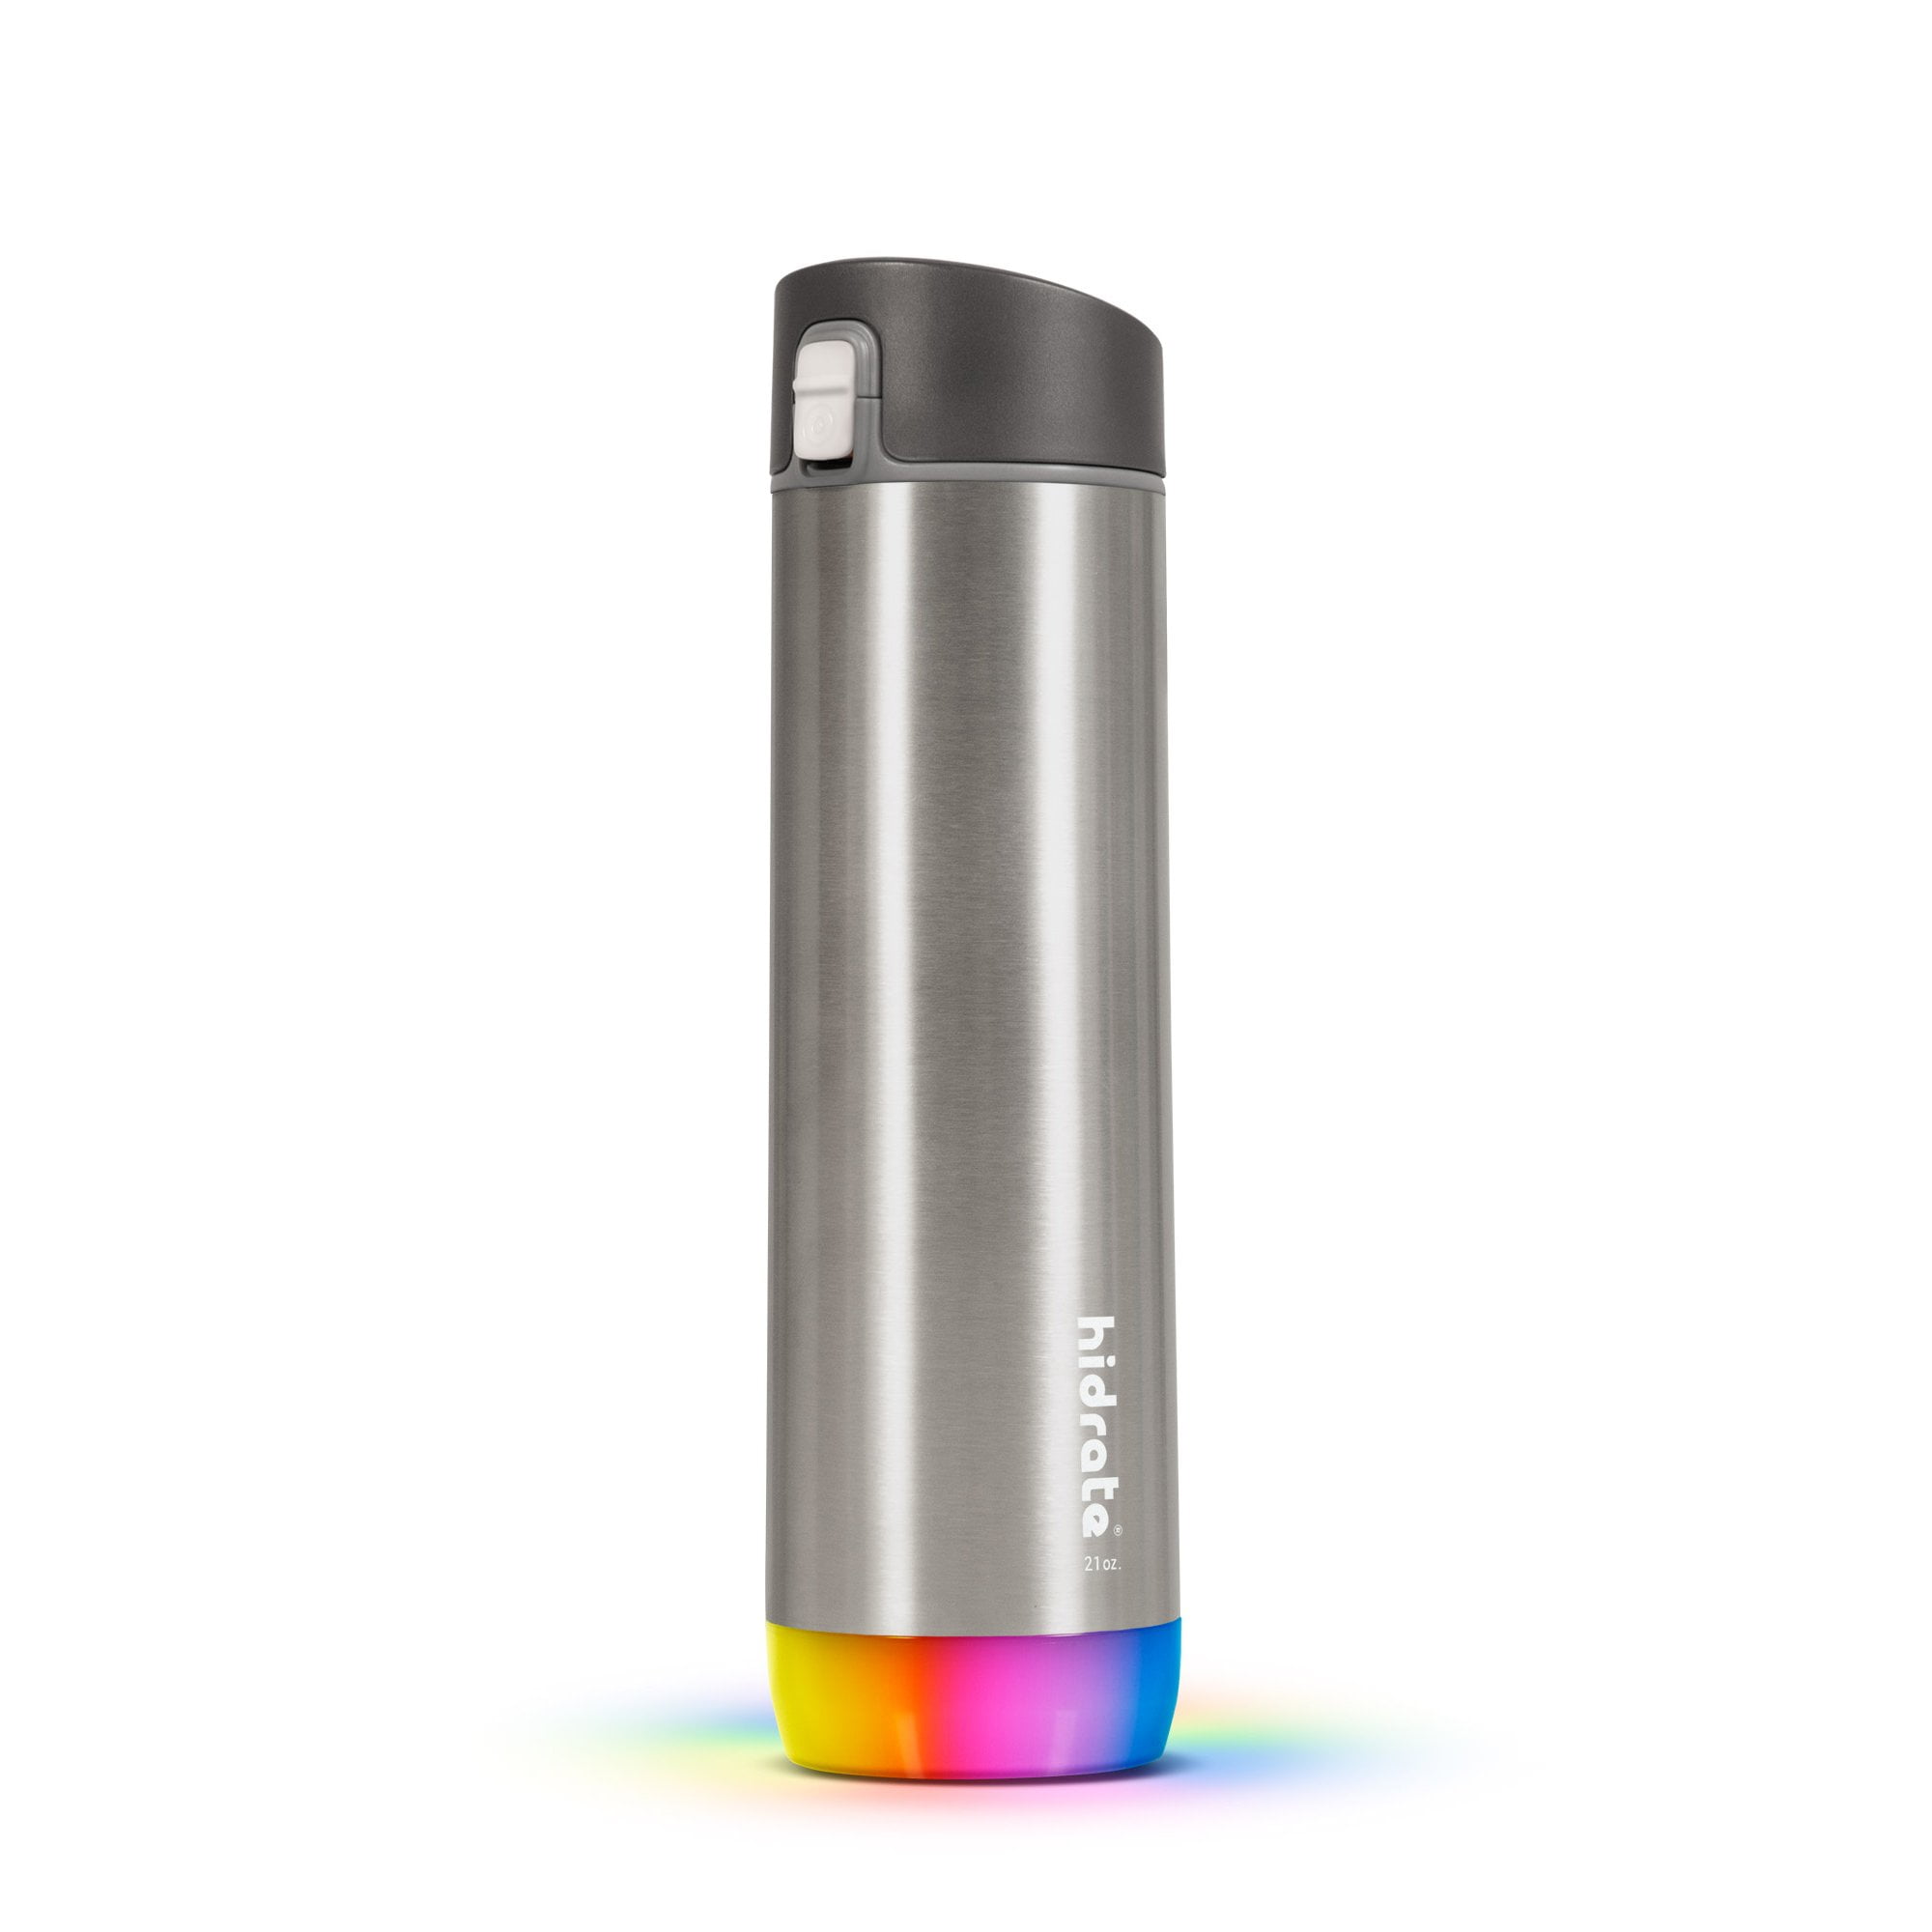 Smart Insulated Water Thermal Bottle, Portable Real-time